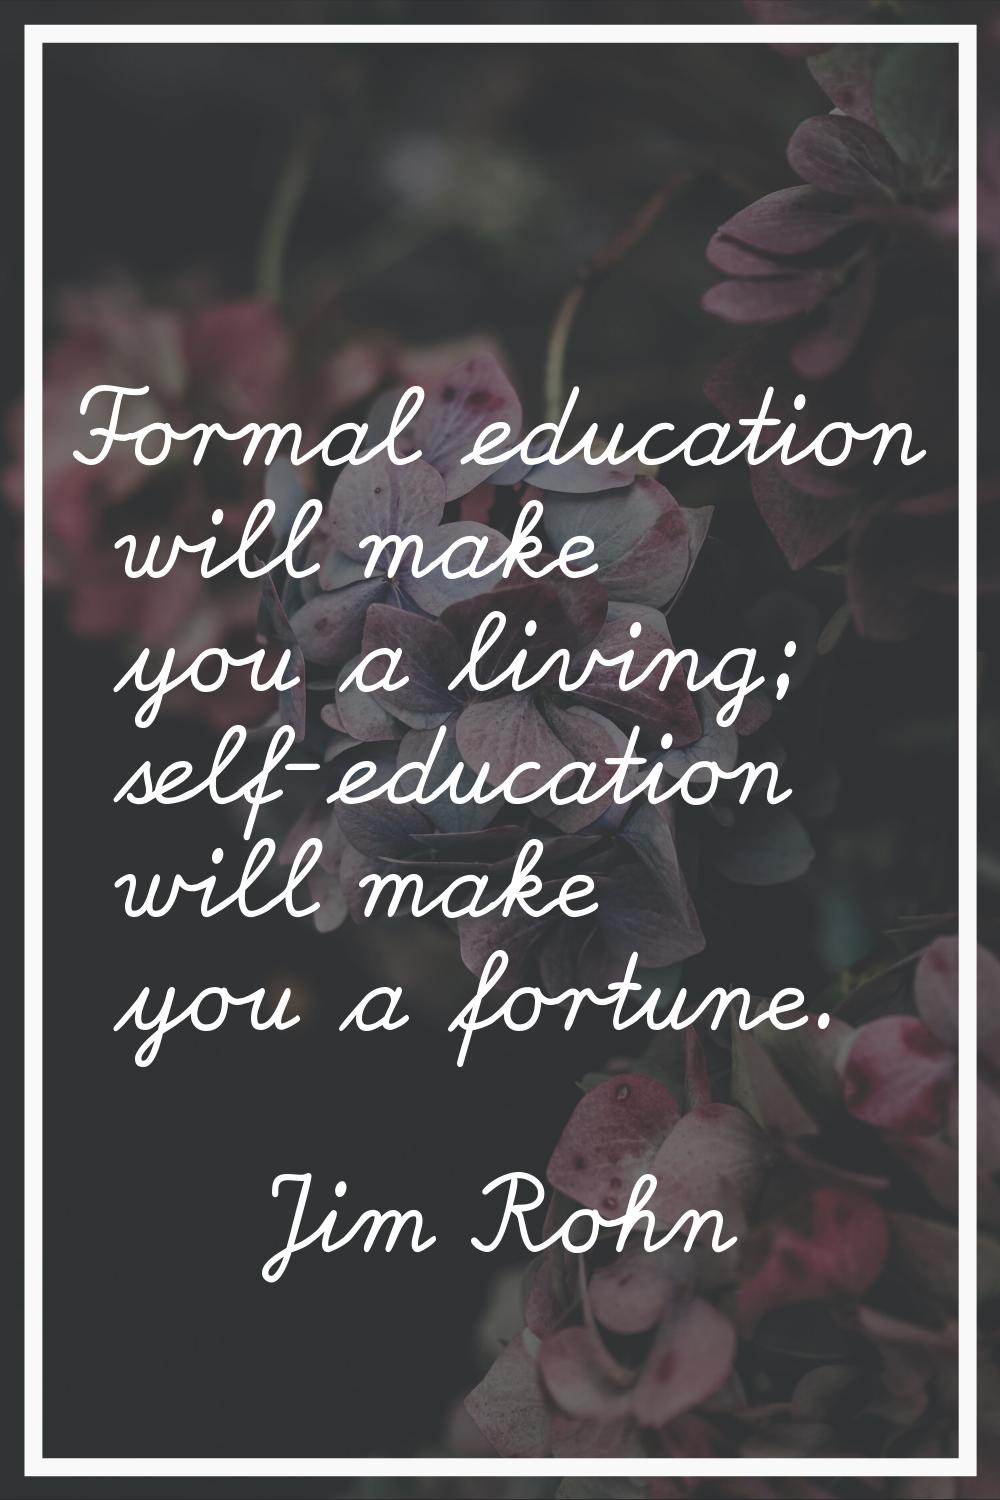 Formal education will make you a living; self-education will make you a fortune.